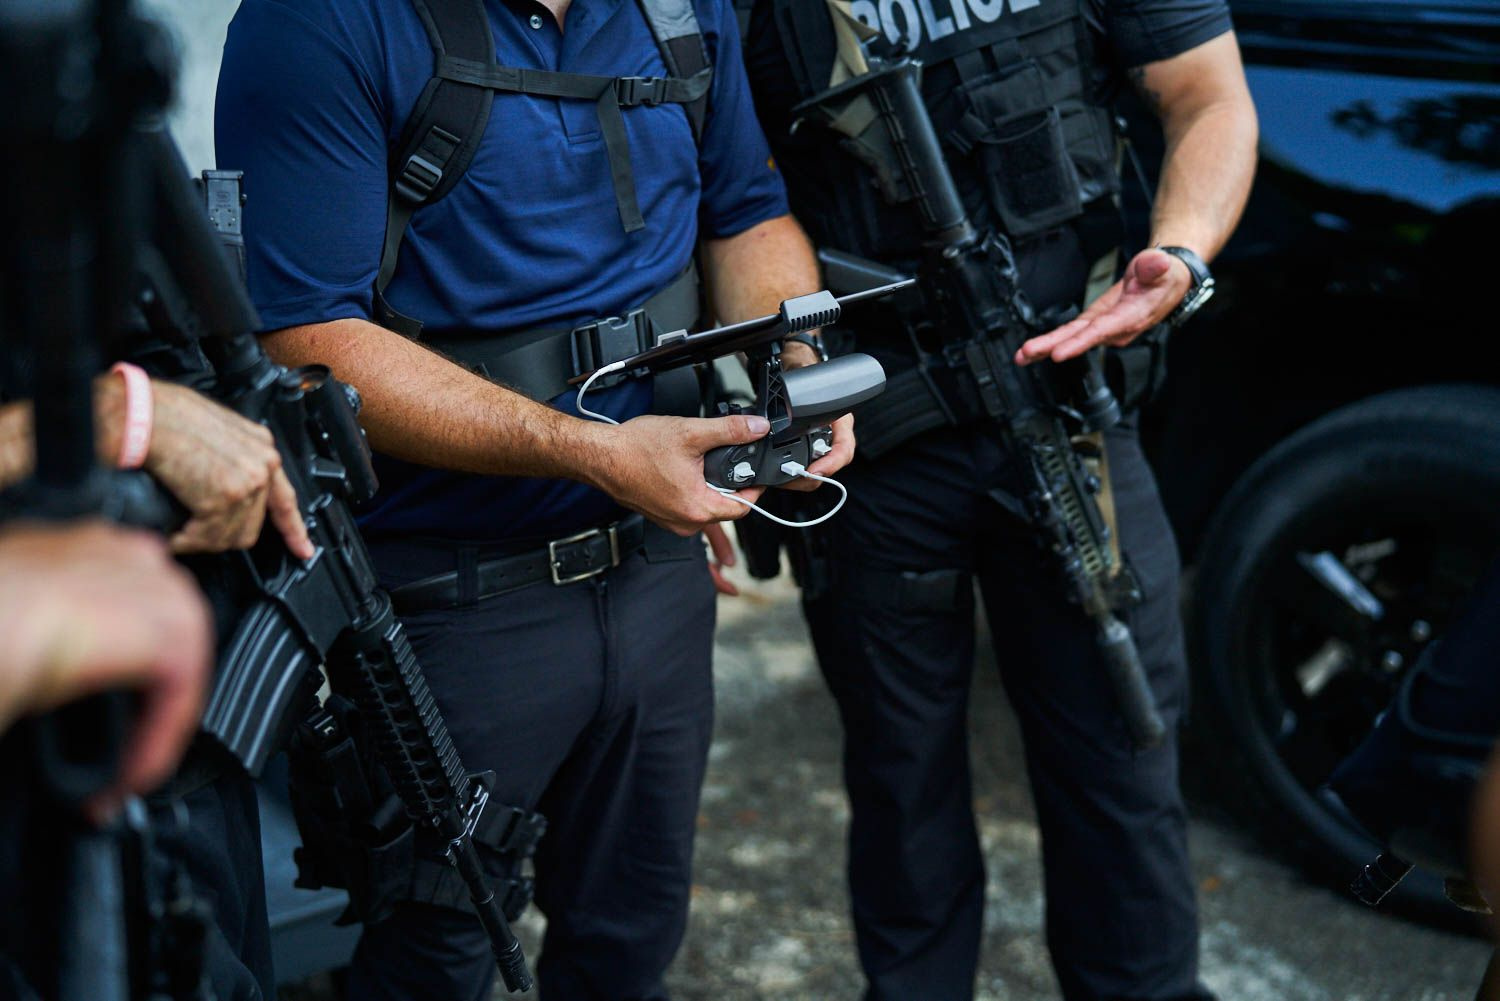 The midriff of 3 people with assault rifles talking to a drone operator with the remote controller as the central focus